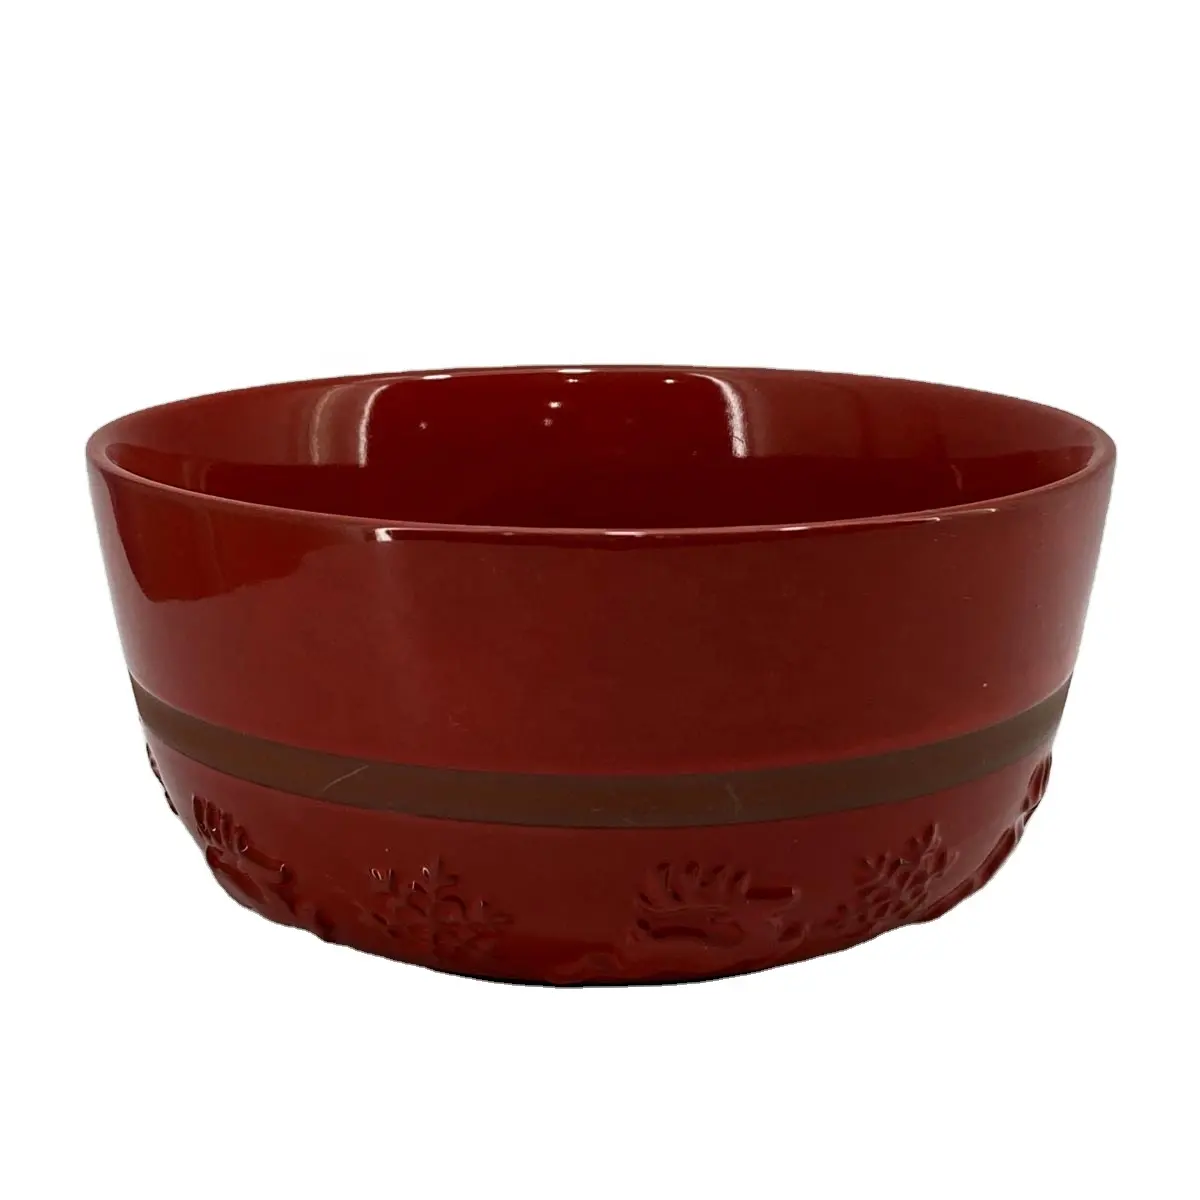 6" round ceramic candy bowl with reindeer decoration